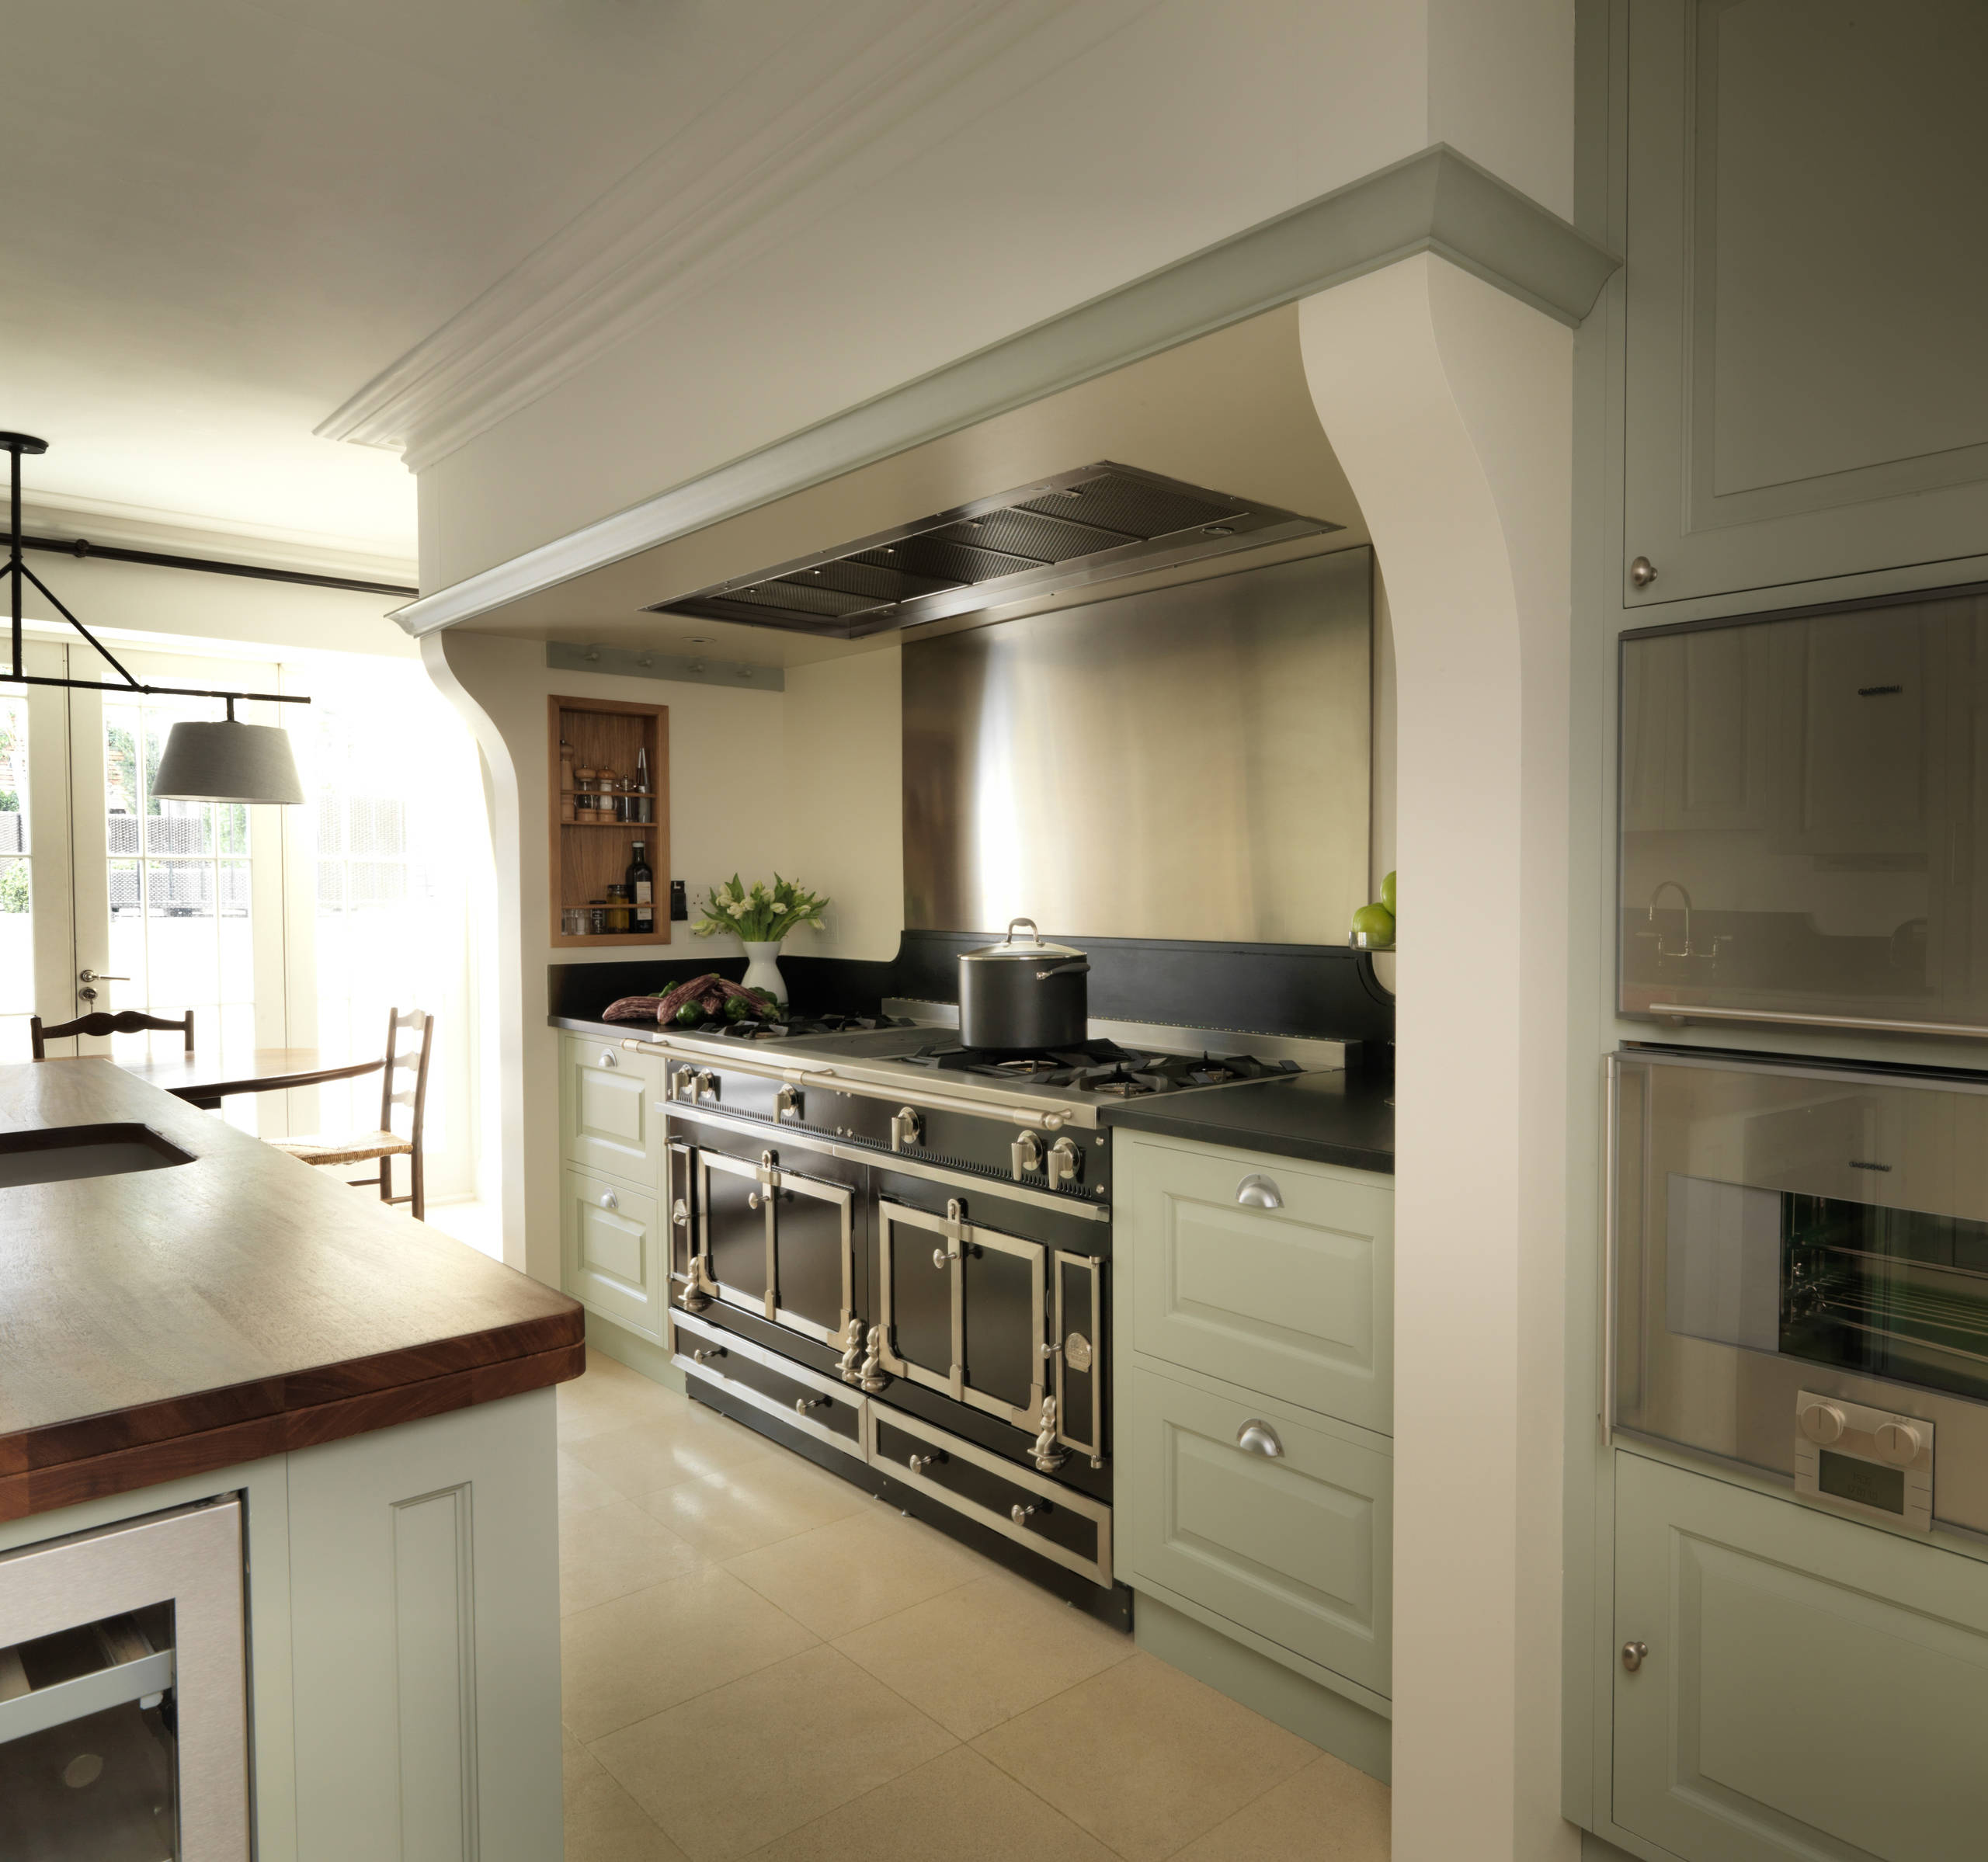 Kensington Kitchen designed and made by Tim Wood